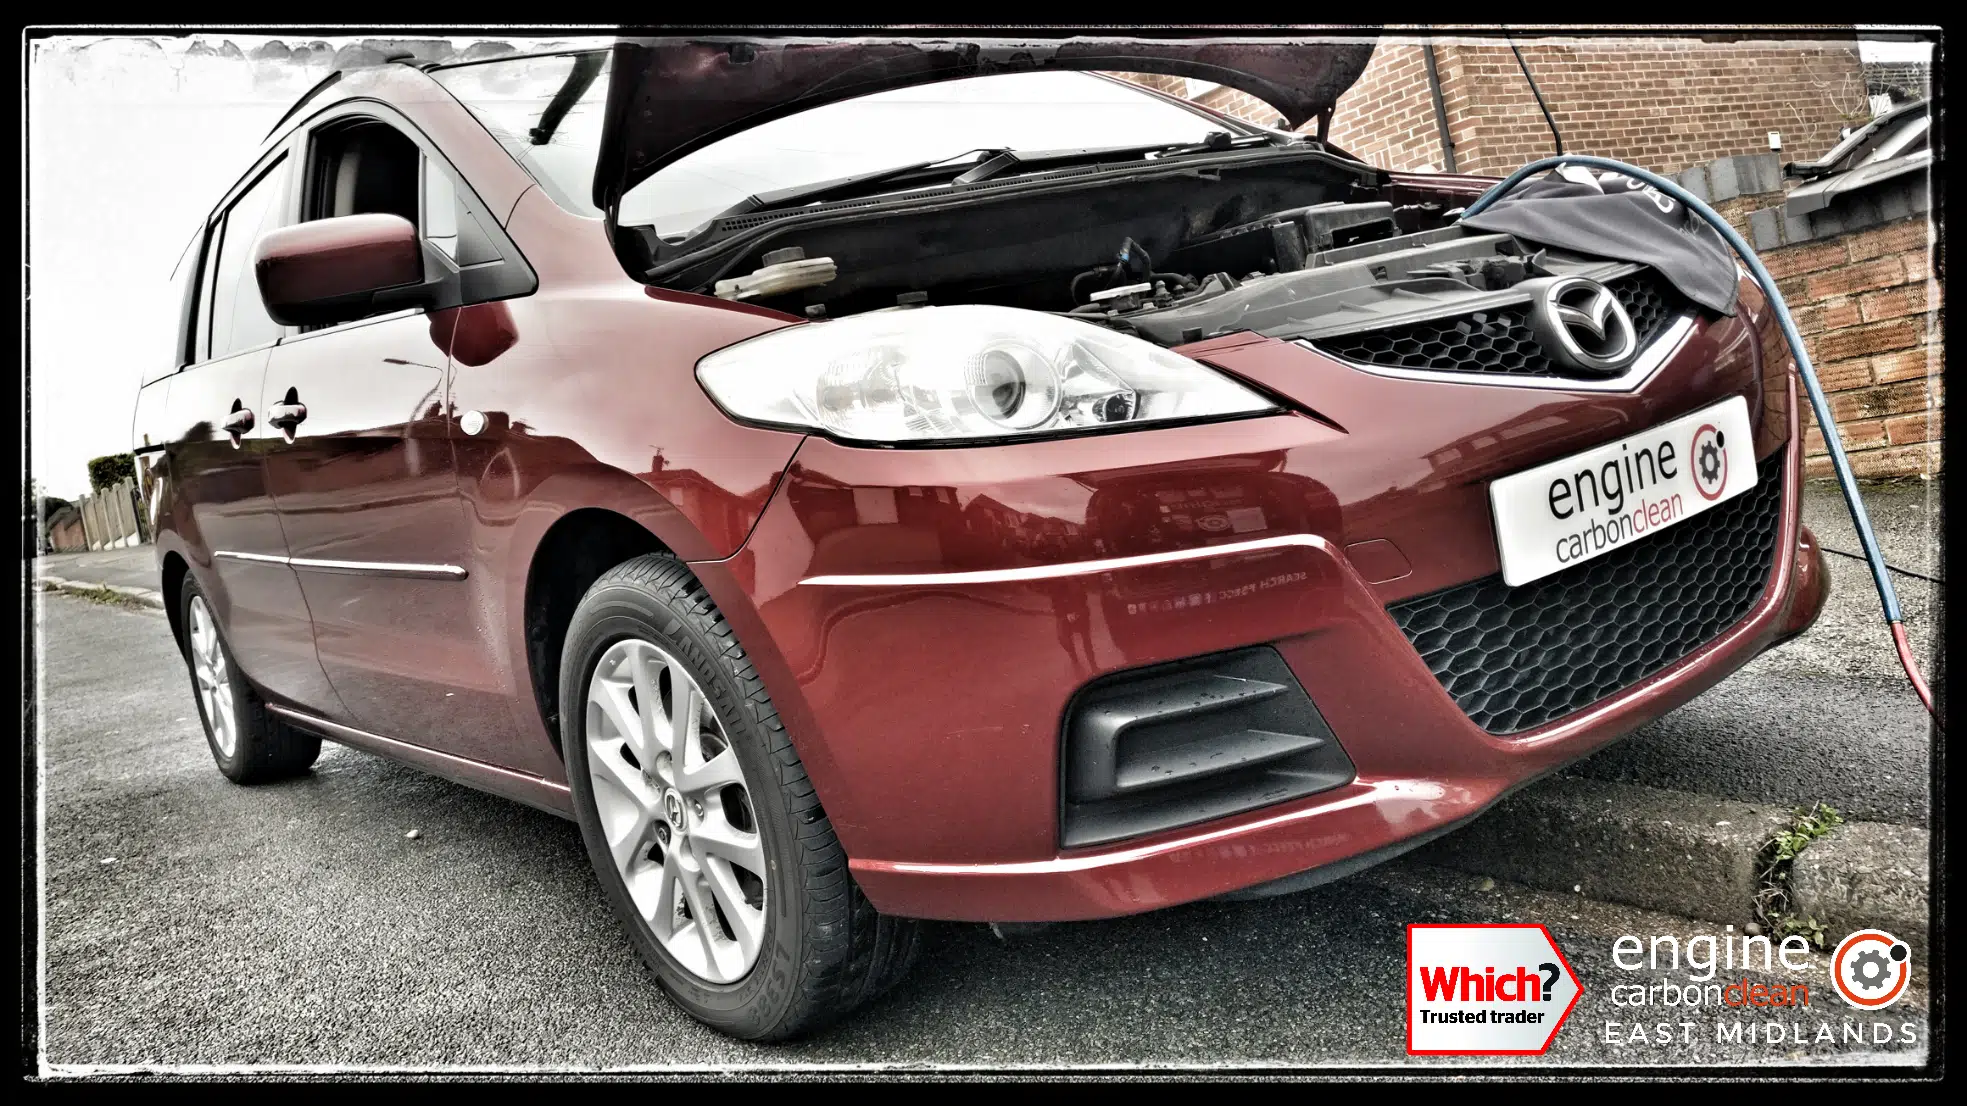 Engine Carbon Clean on a Mazda 5 1.8 petrol (2009 - 111,687 miles)